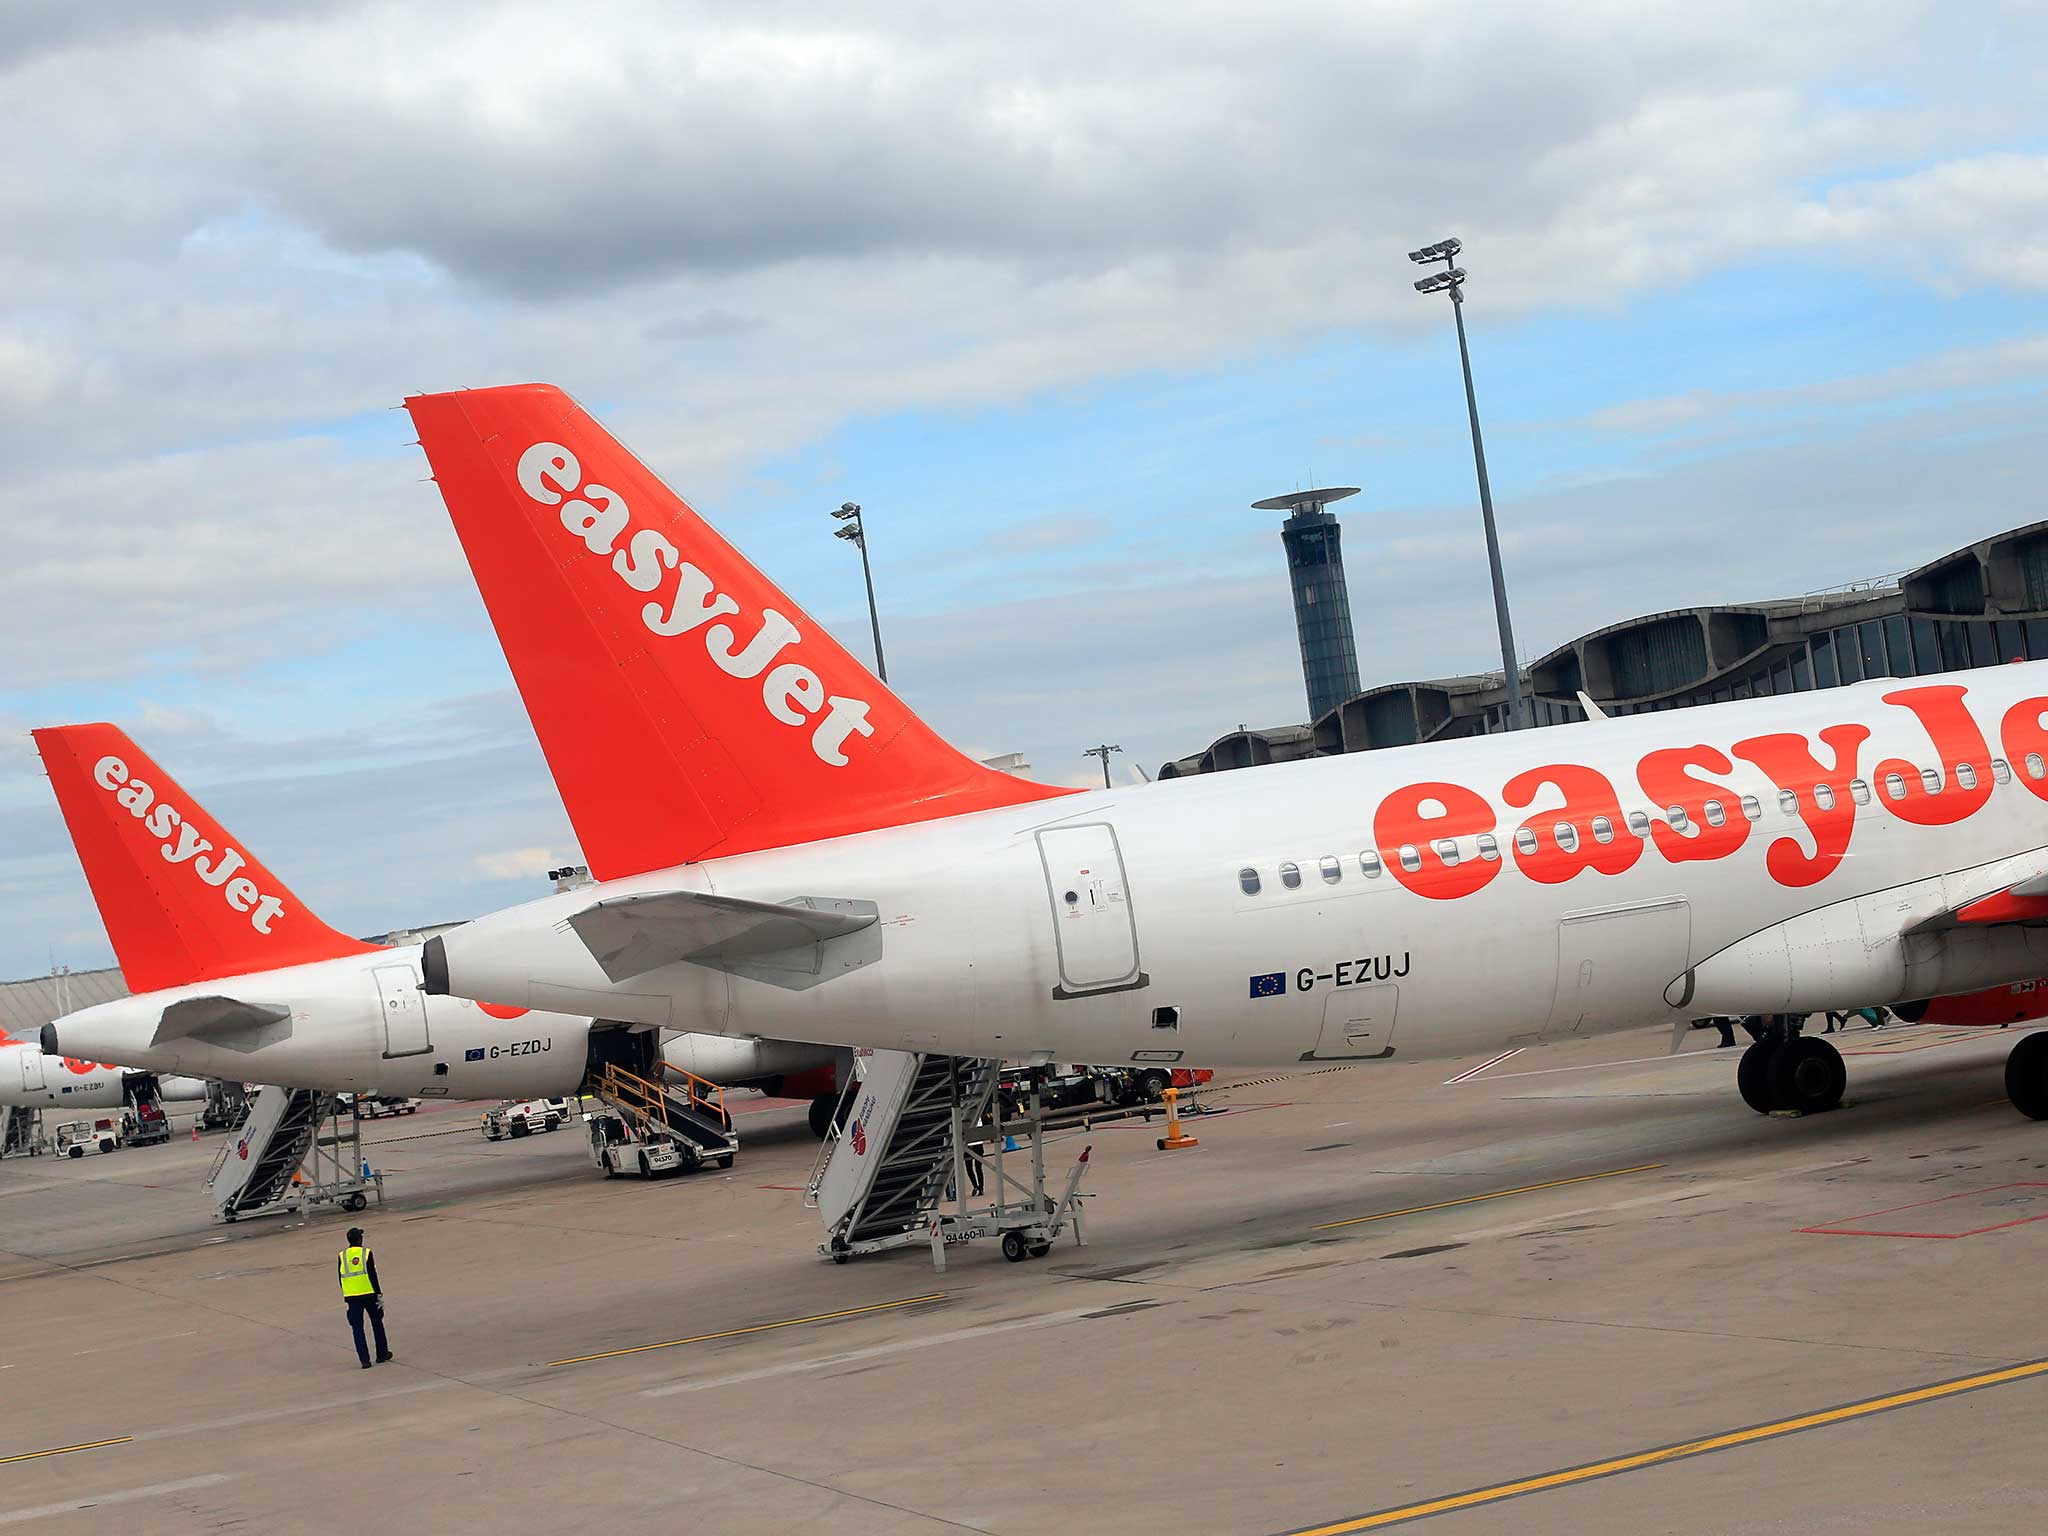 easyJet planes at an airport